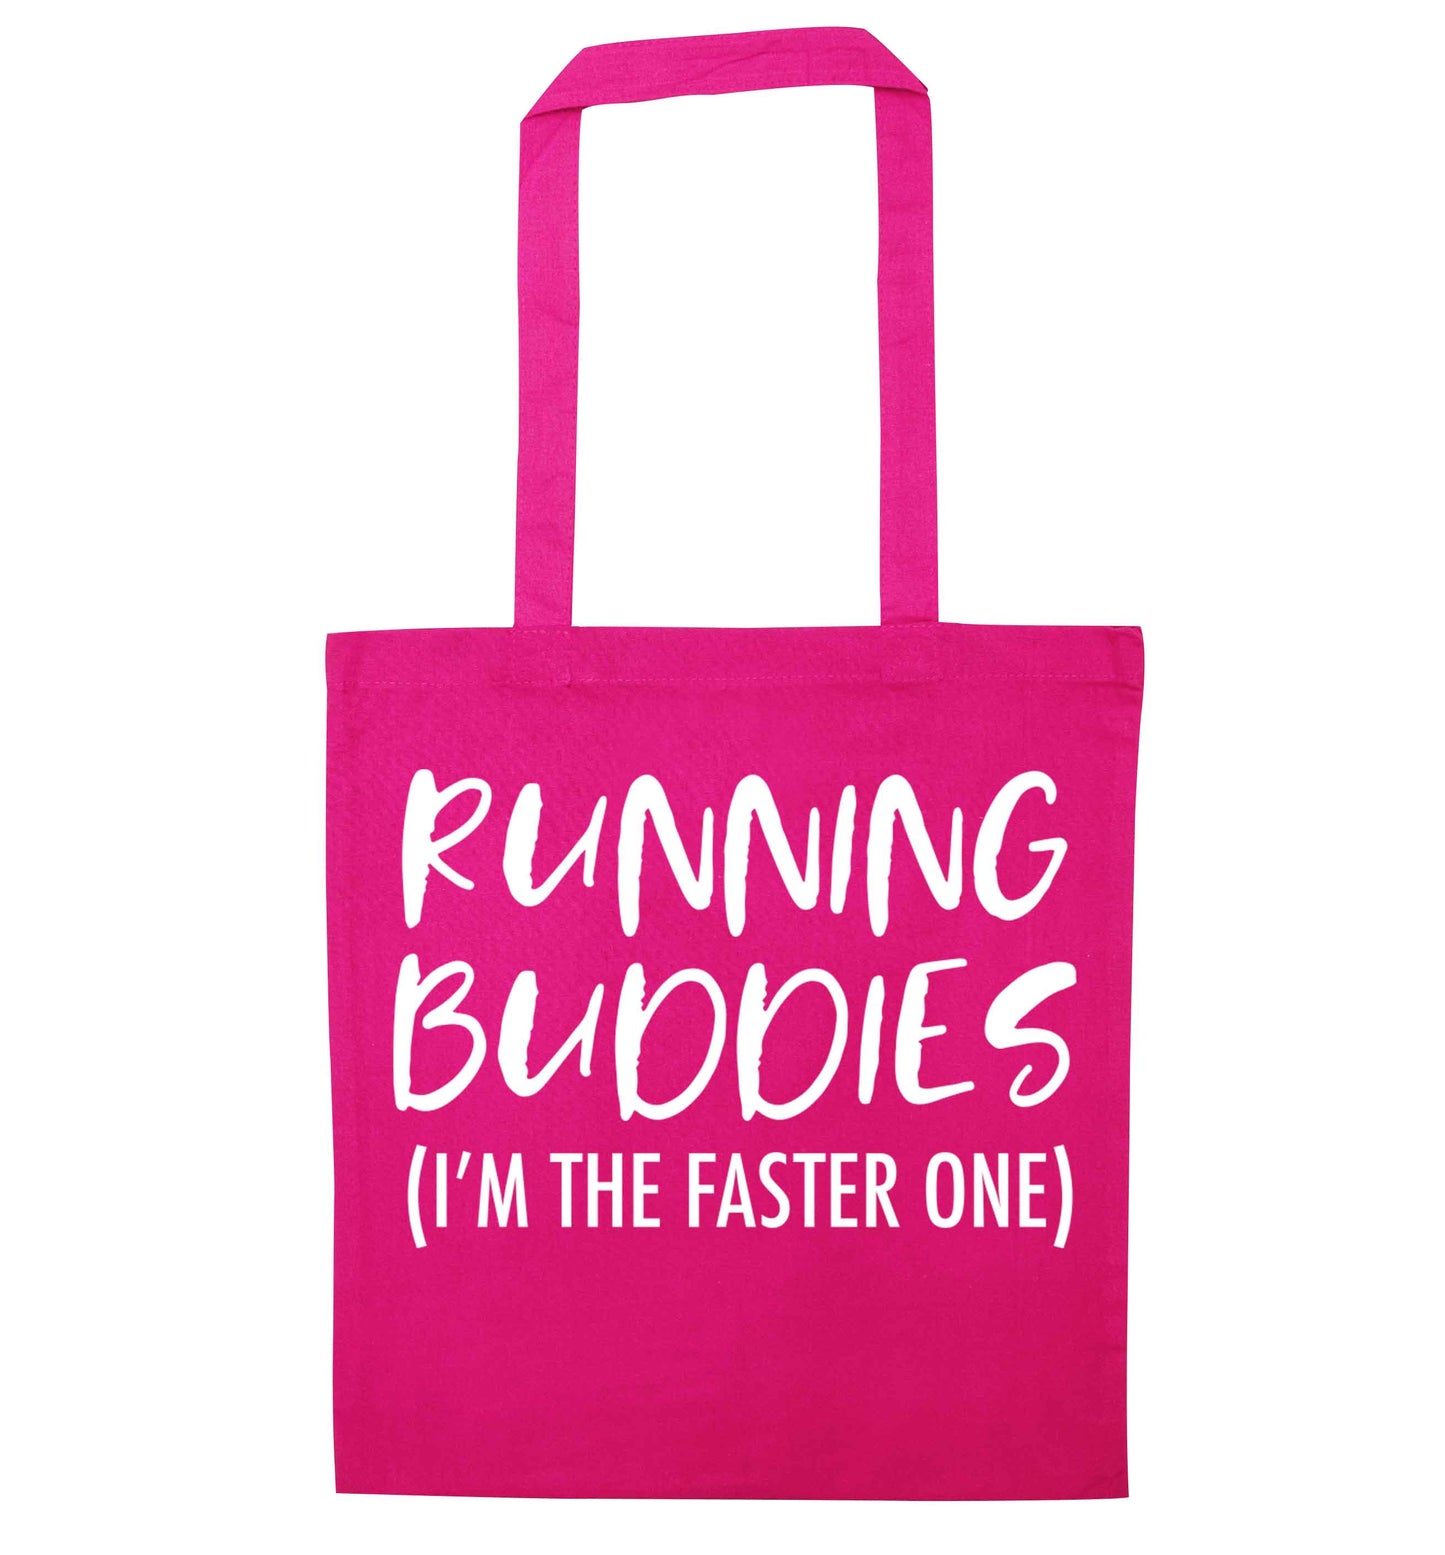 Running buddies (I'm the faster one) pink tote bag